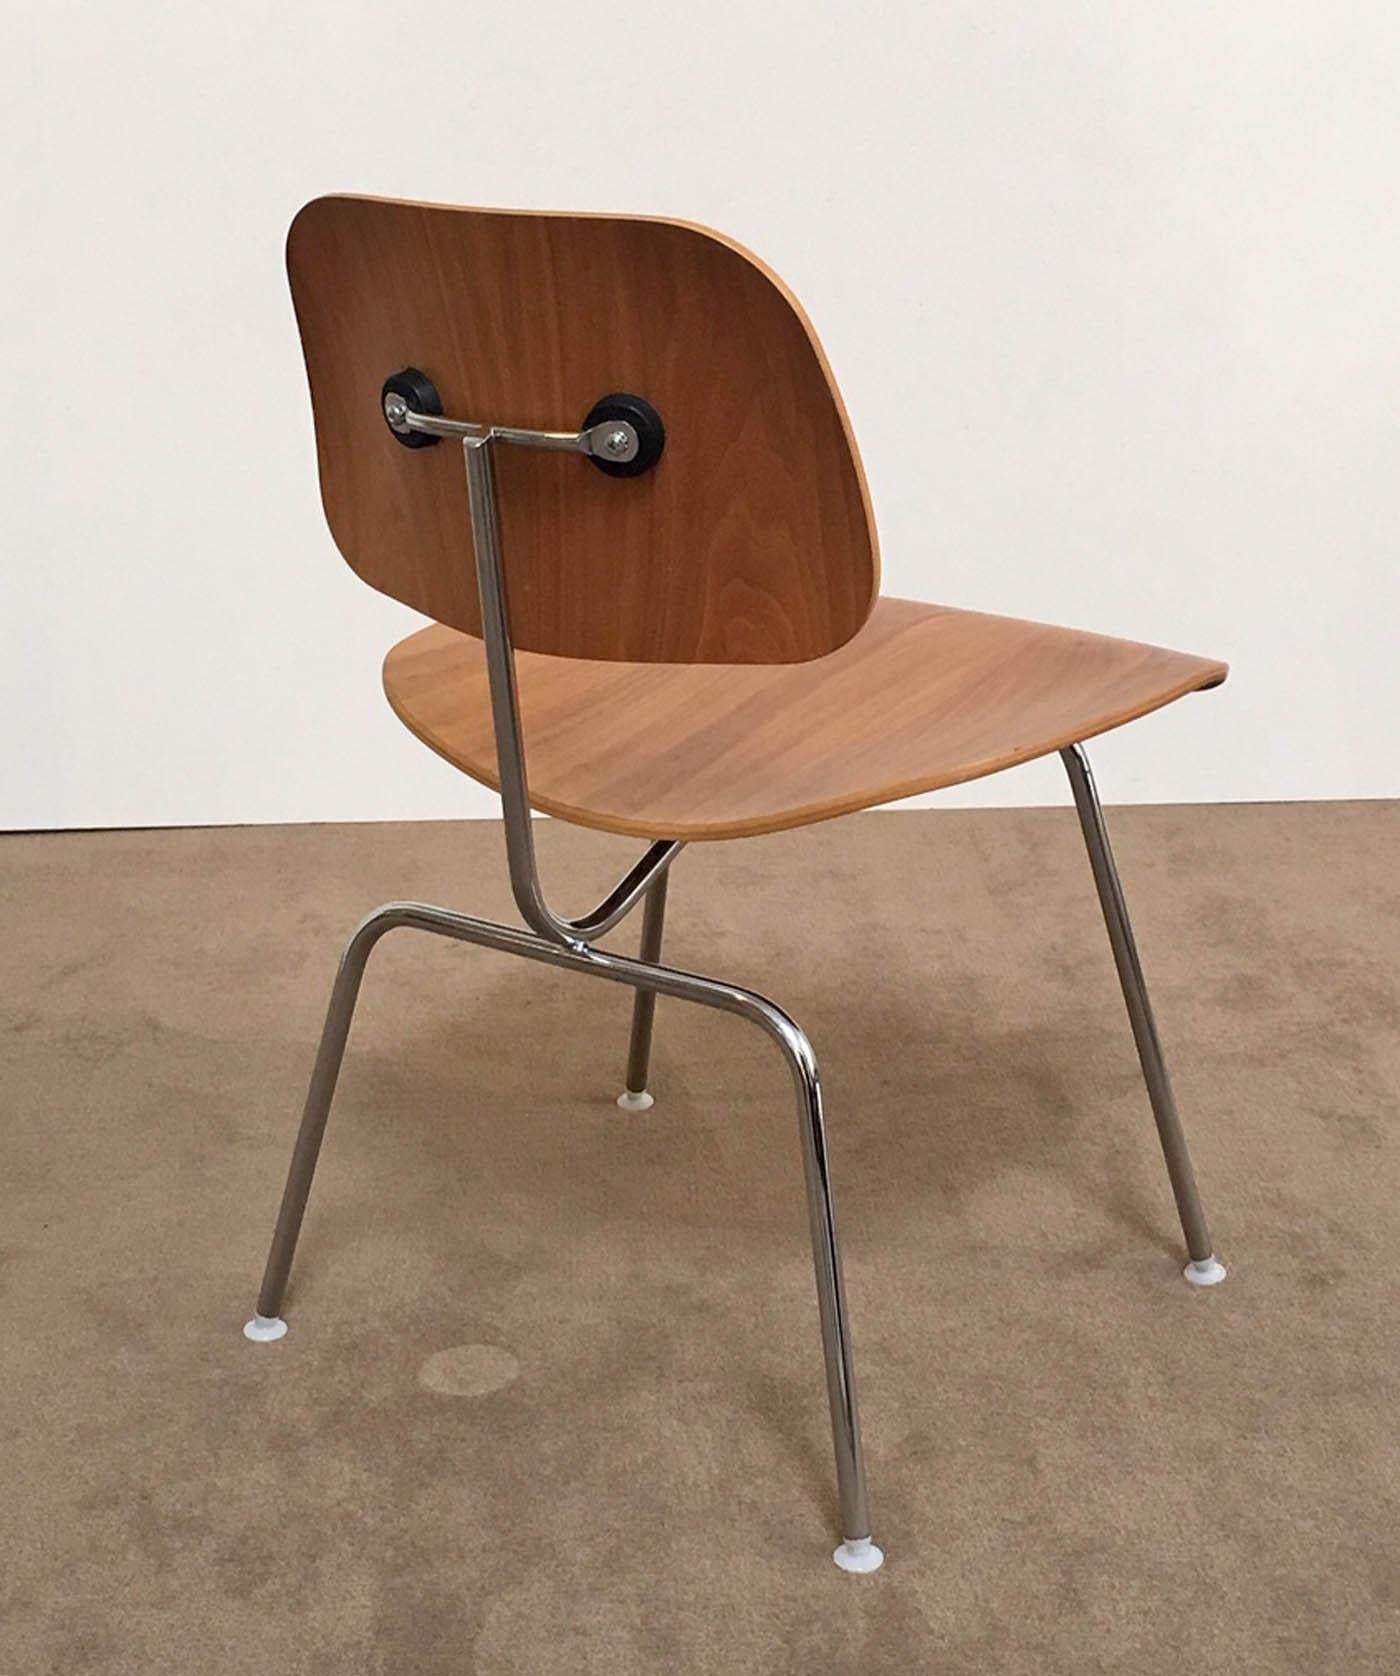 American Eight Dining Chairs Designed by Ray and Charles Eames for Herman Miller